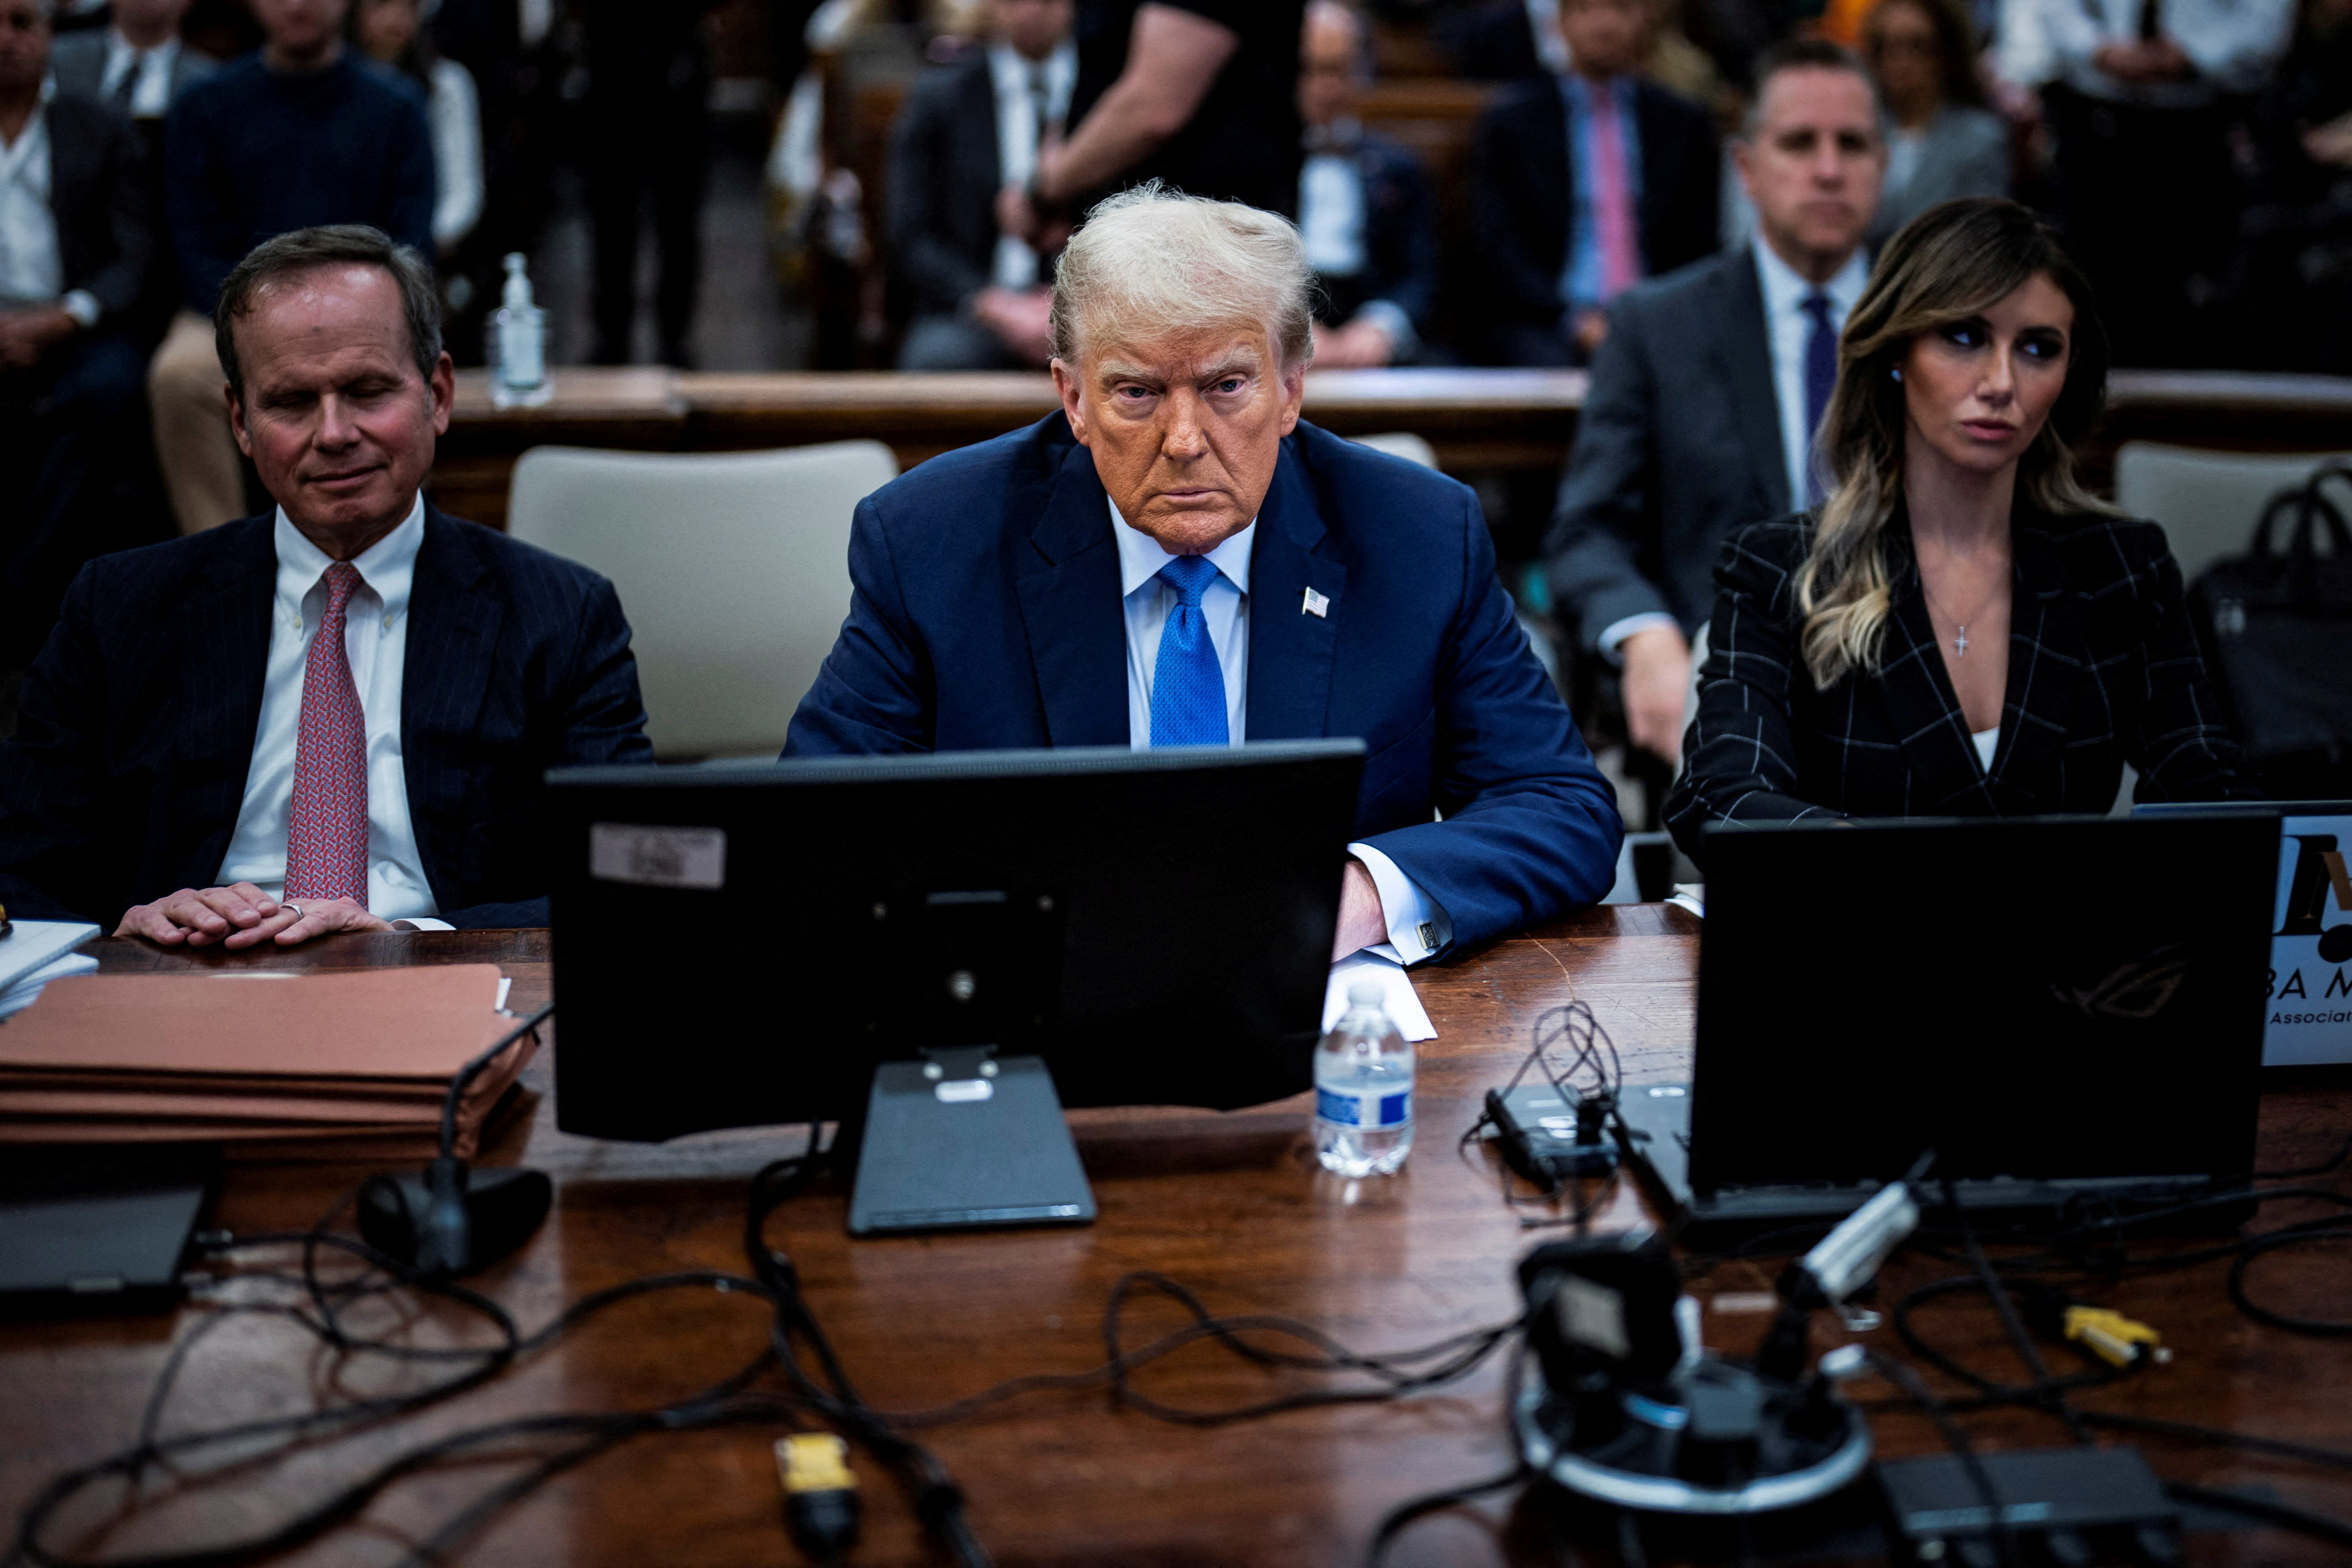 Donald Trump sits with his attorneys Christoper Kise, left, and Alina Habba, right, during his civil fraud trial in New York City.